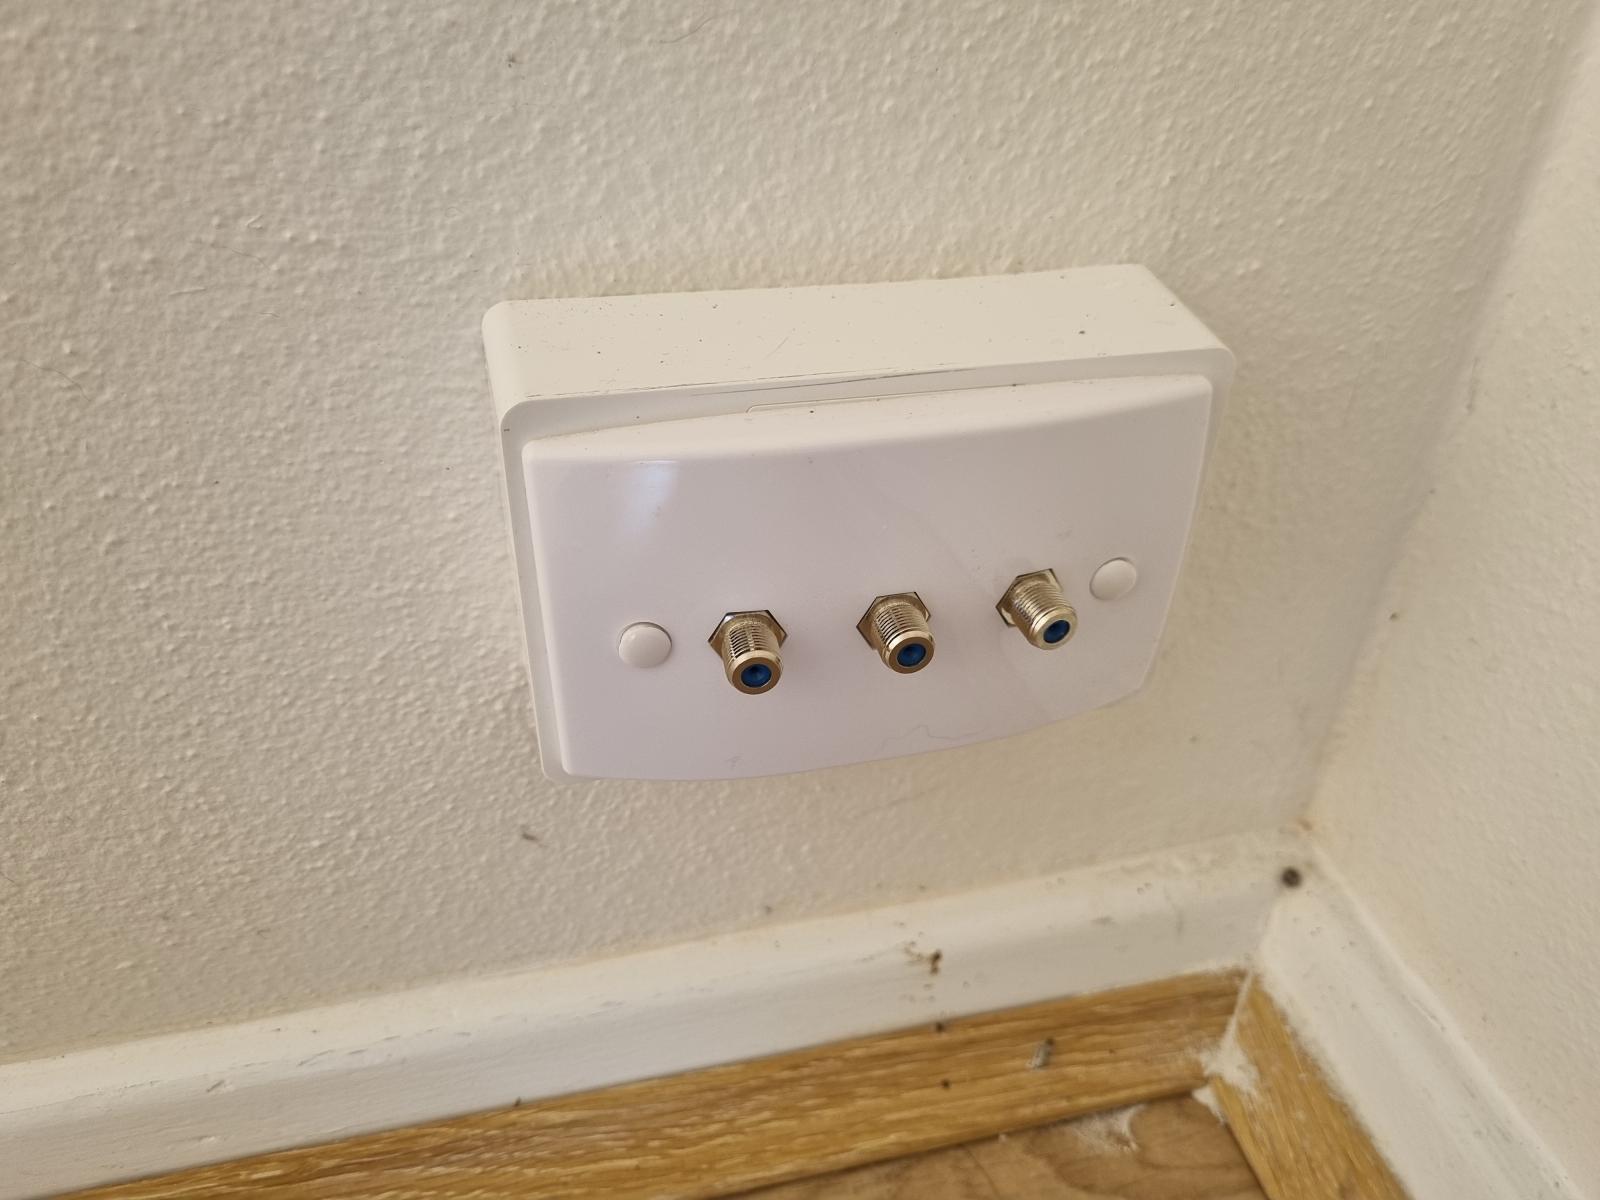 What are the plugs in the living room for?